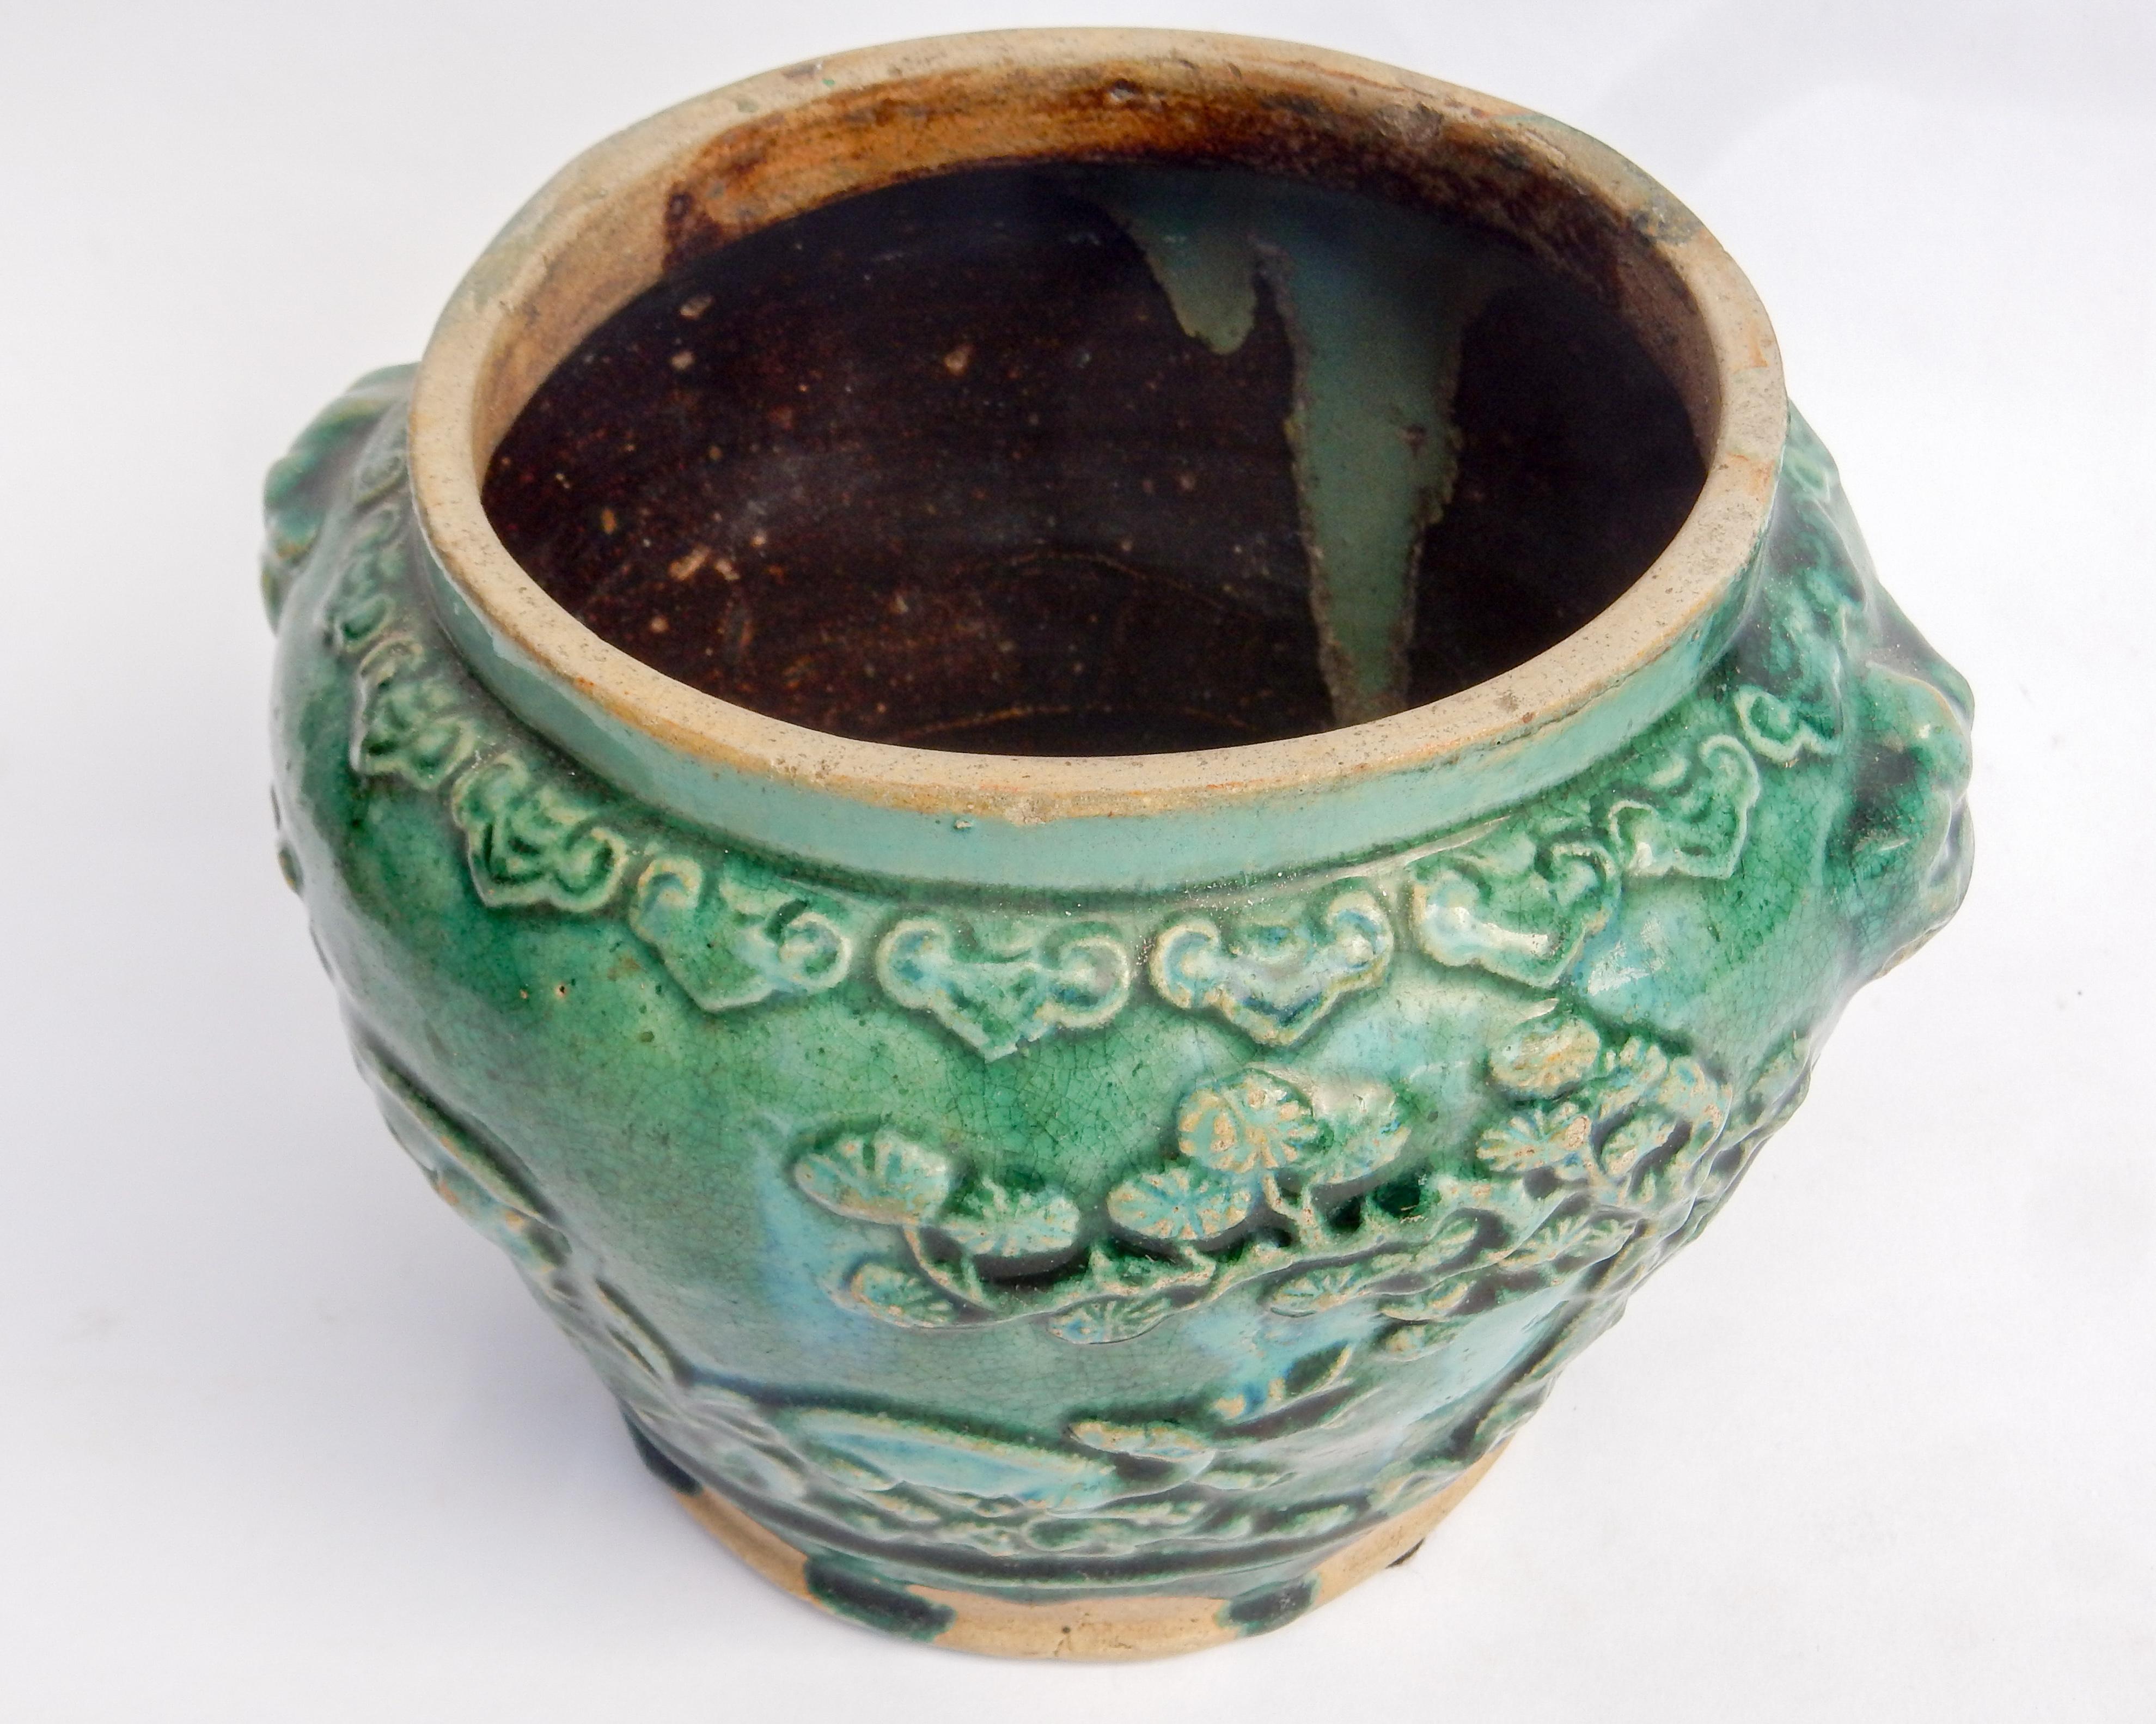 Green glazed pot from Southern Thailand found in Java, late 19th century
This small pot has a lovely green glaze and is decorated all around with auspicious three dimensional motifs cherry blossoms, dragons, a deer, an elephant and lion heads. The